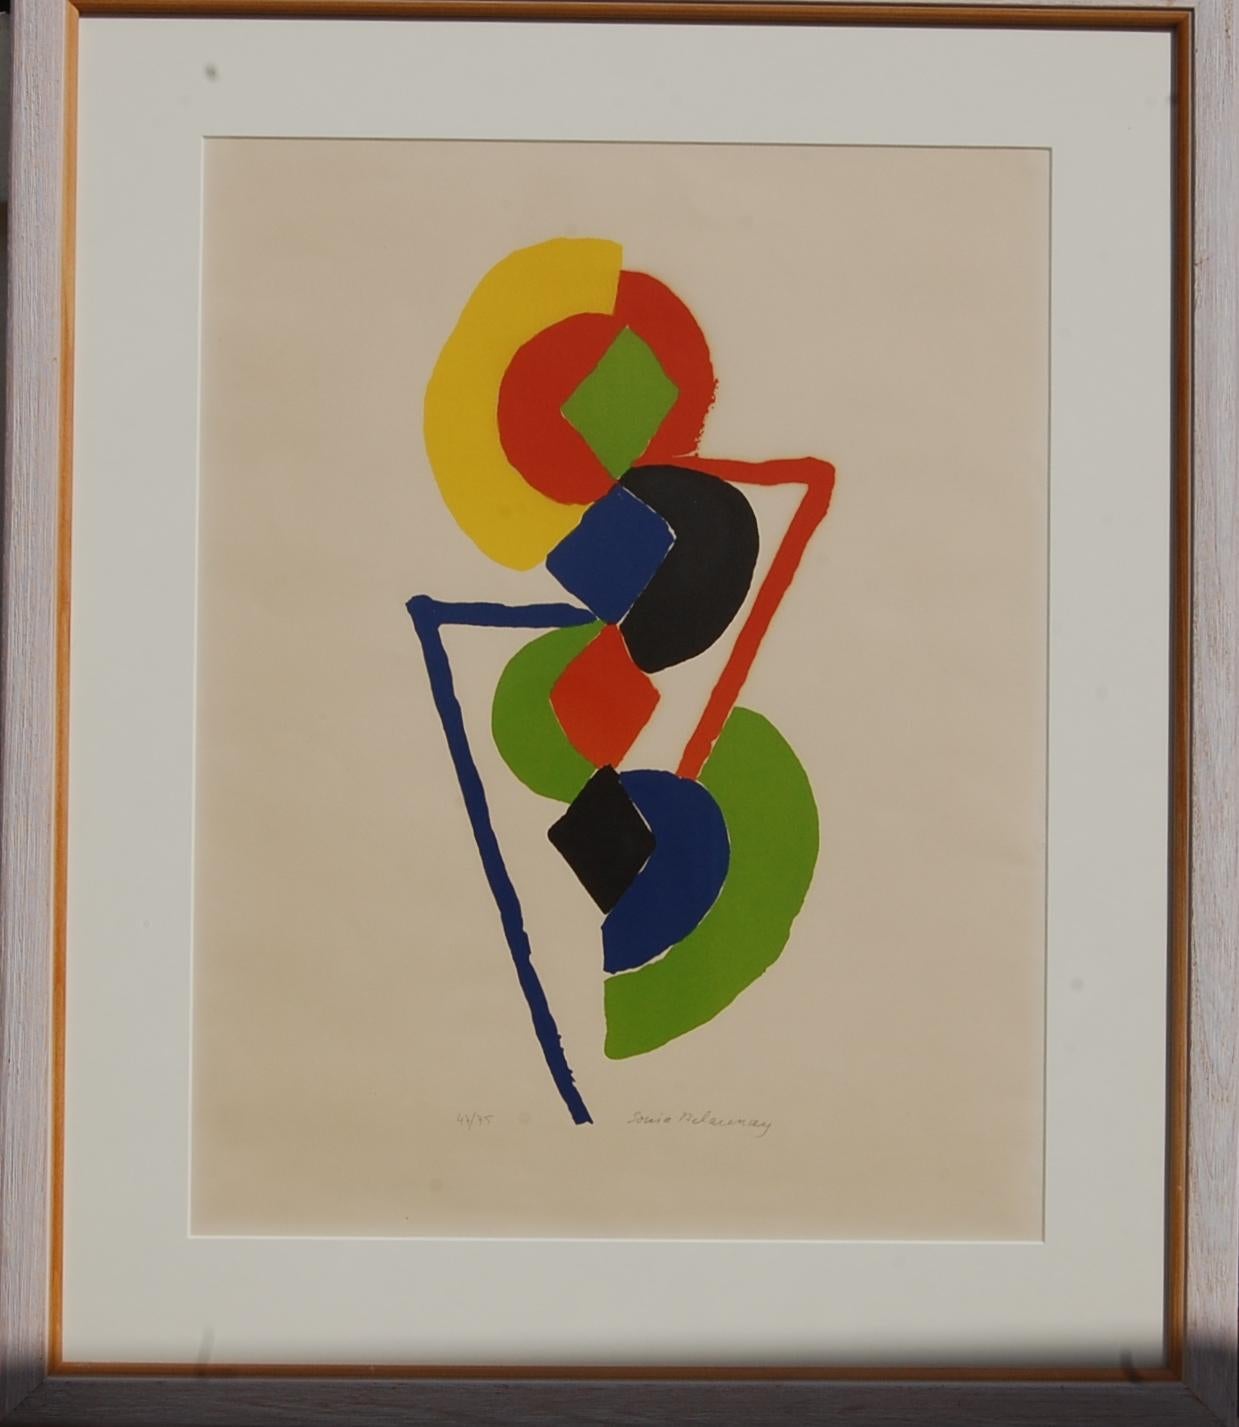 Abstract Geometric - Print by Sonia Delaunay